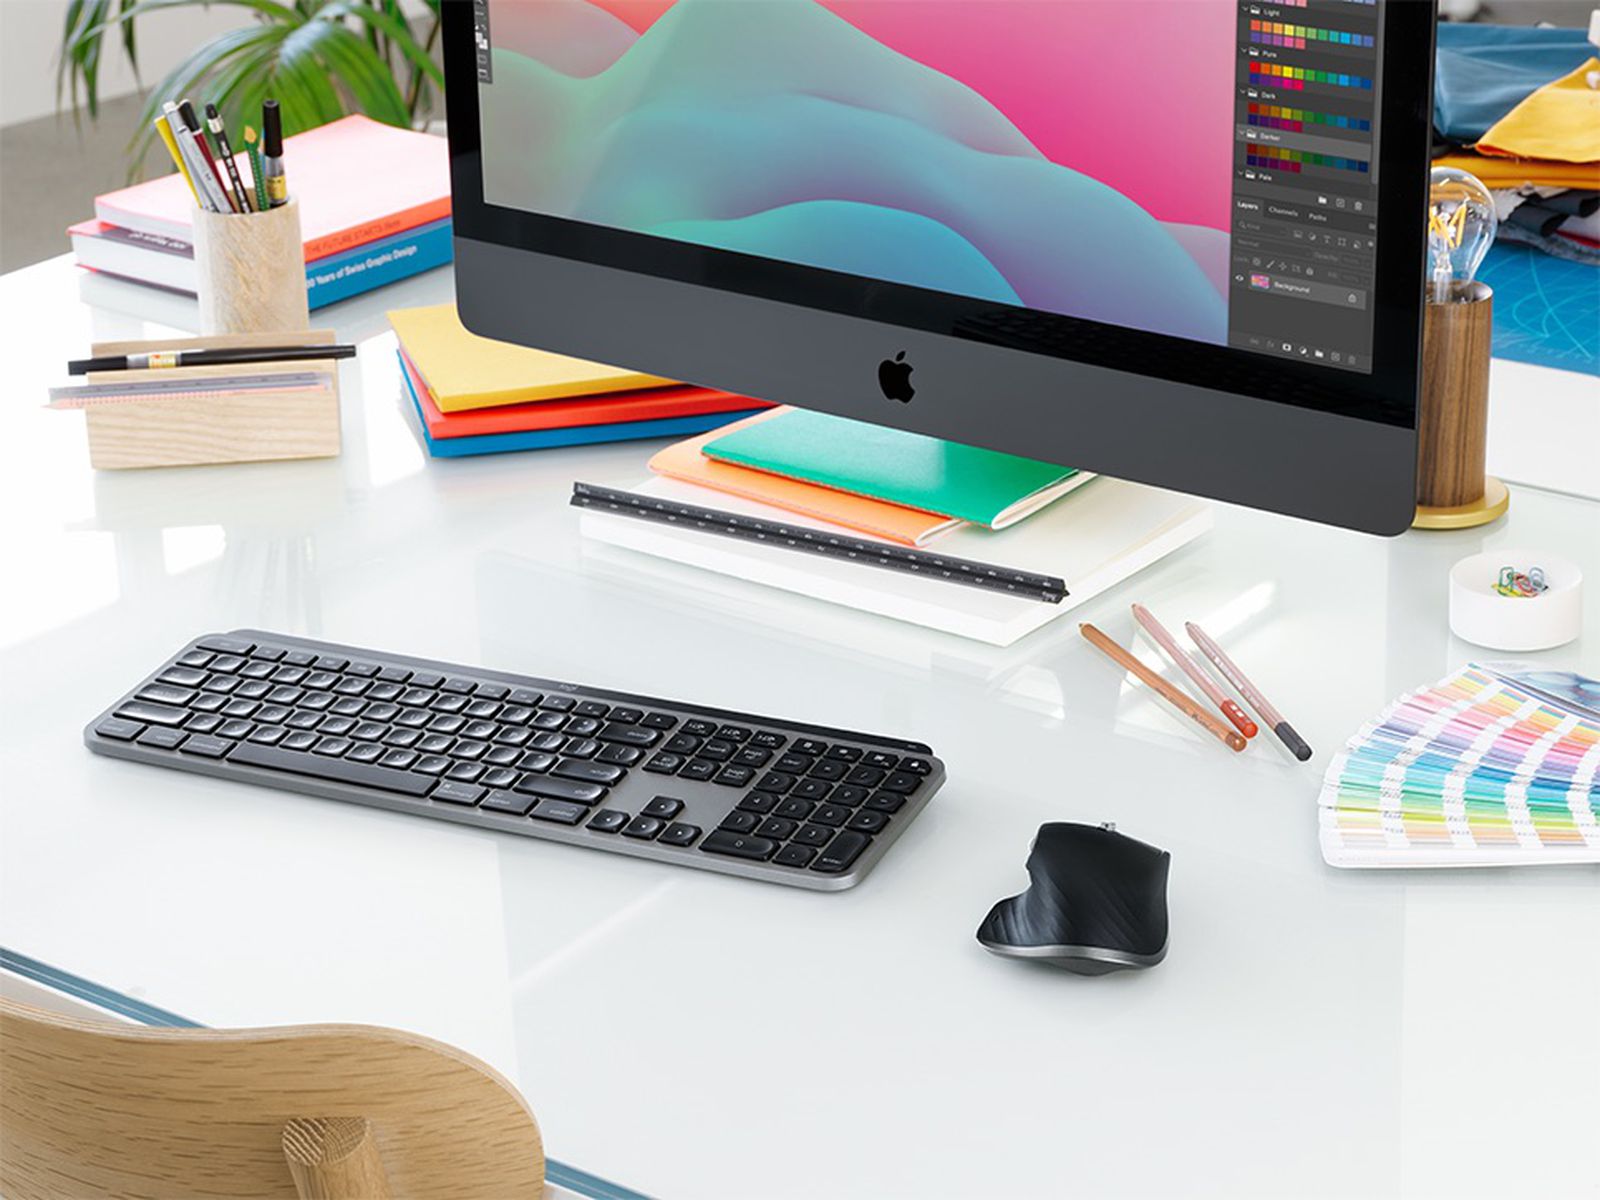 Logitech Launches New Keyboard and Accessories - MacRumors